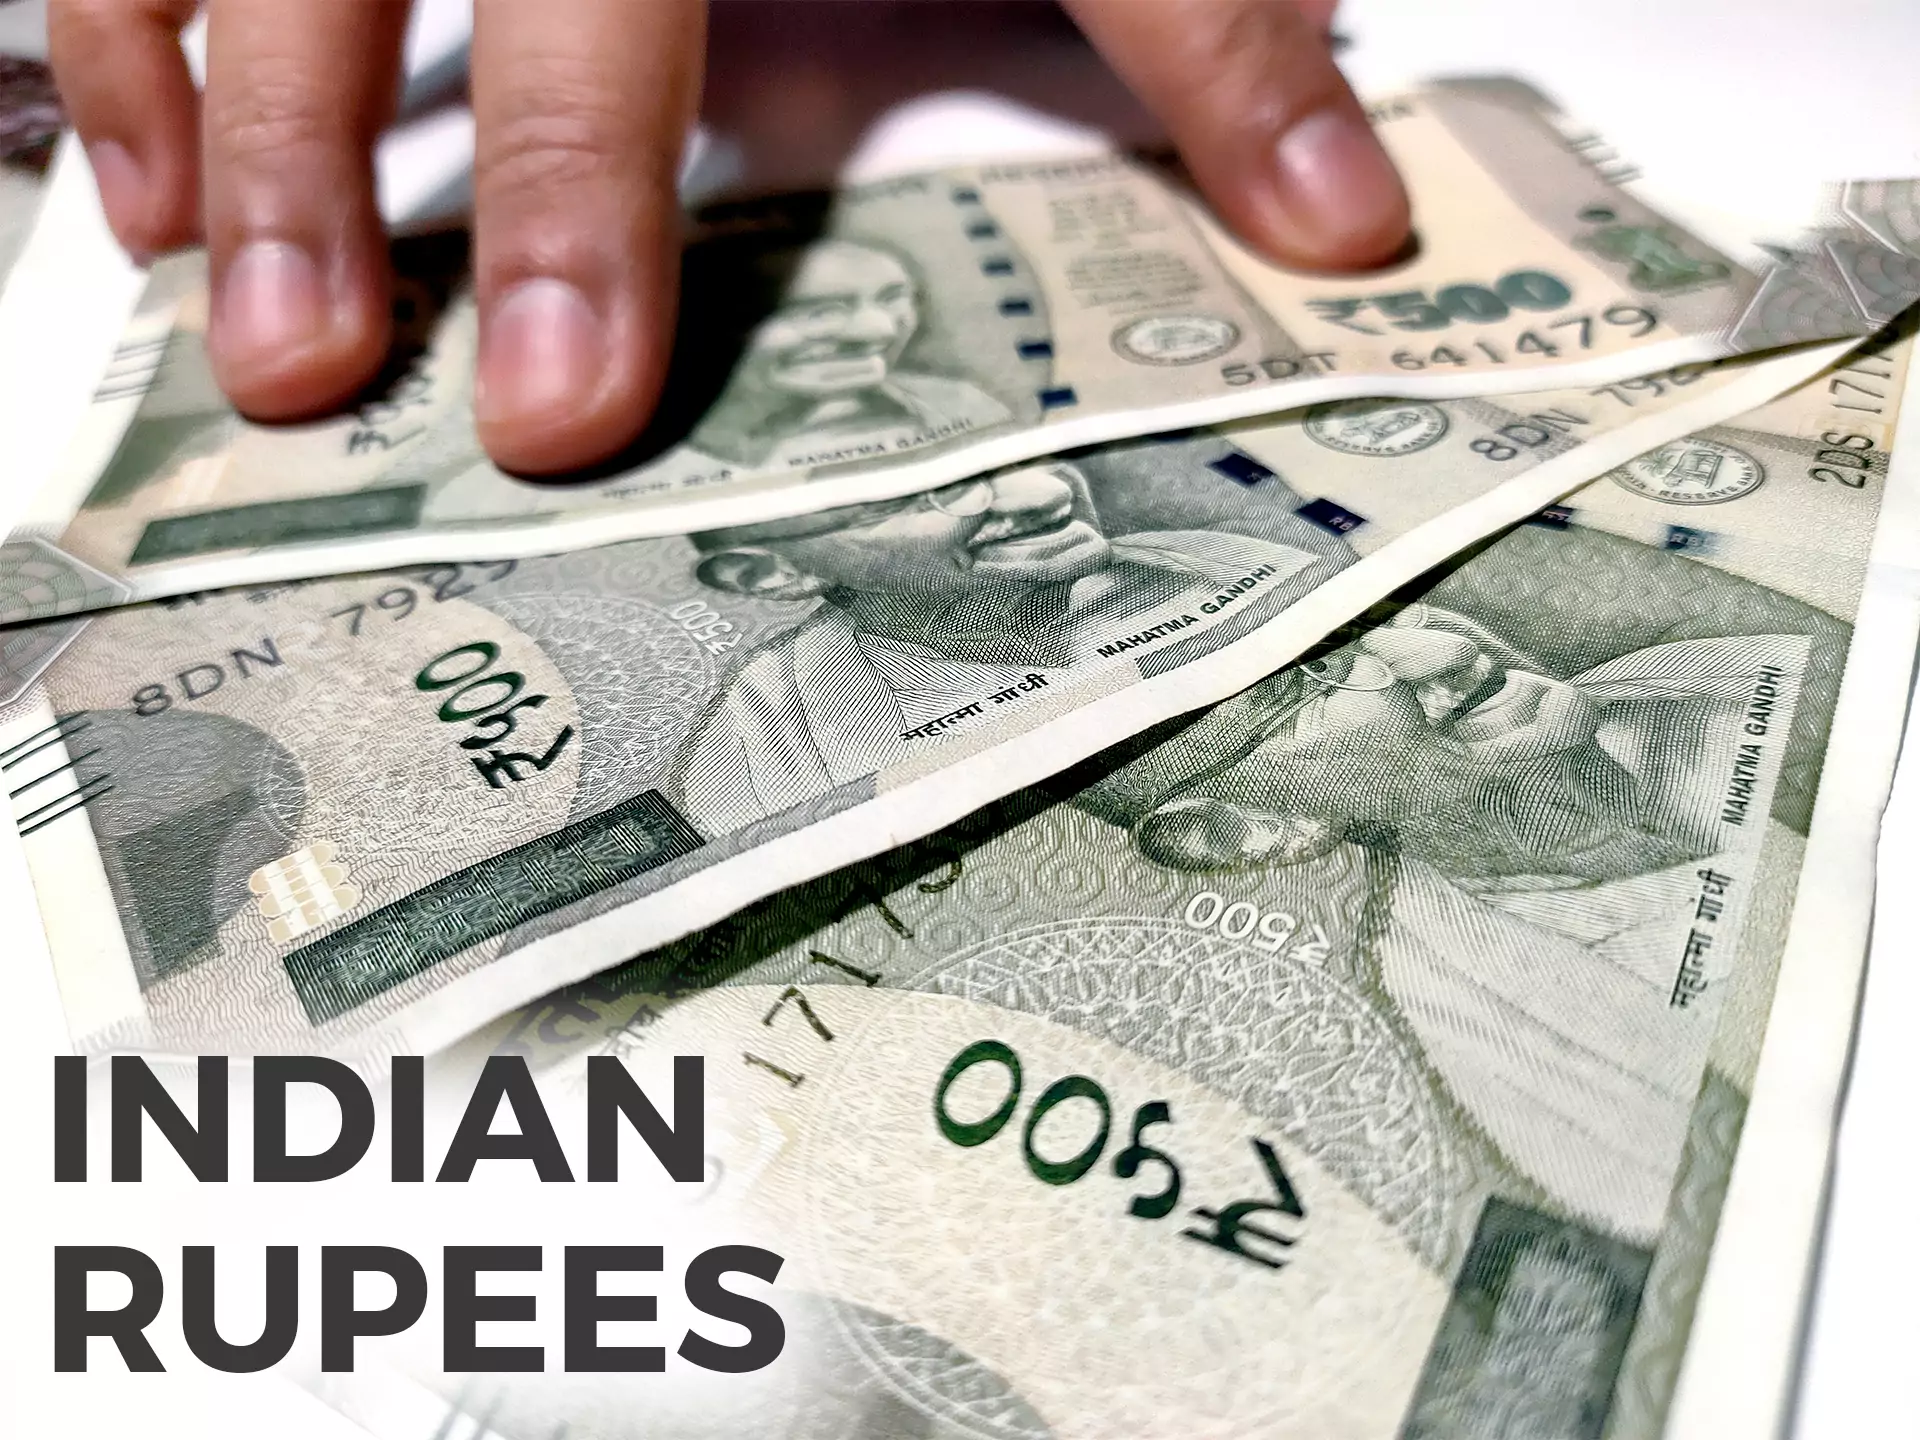 Our reviews sites allow using Indian rupees.